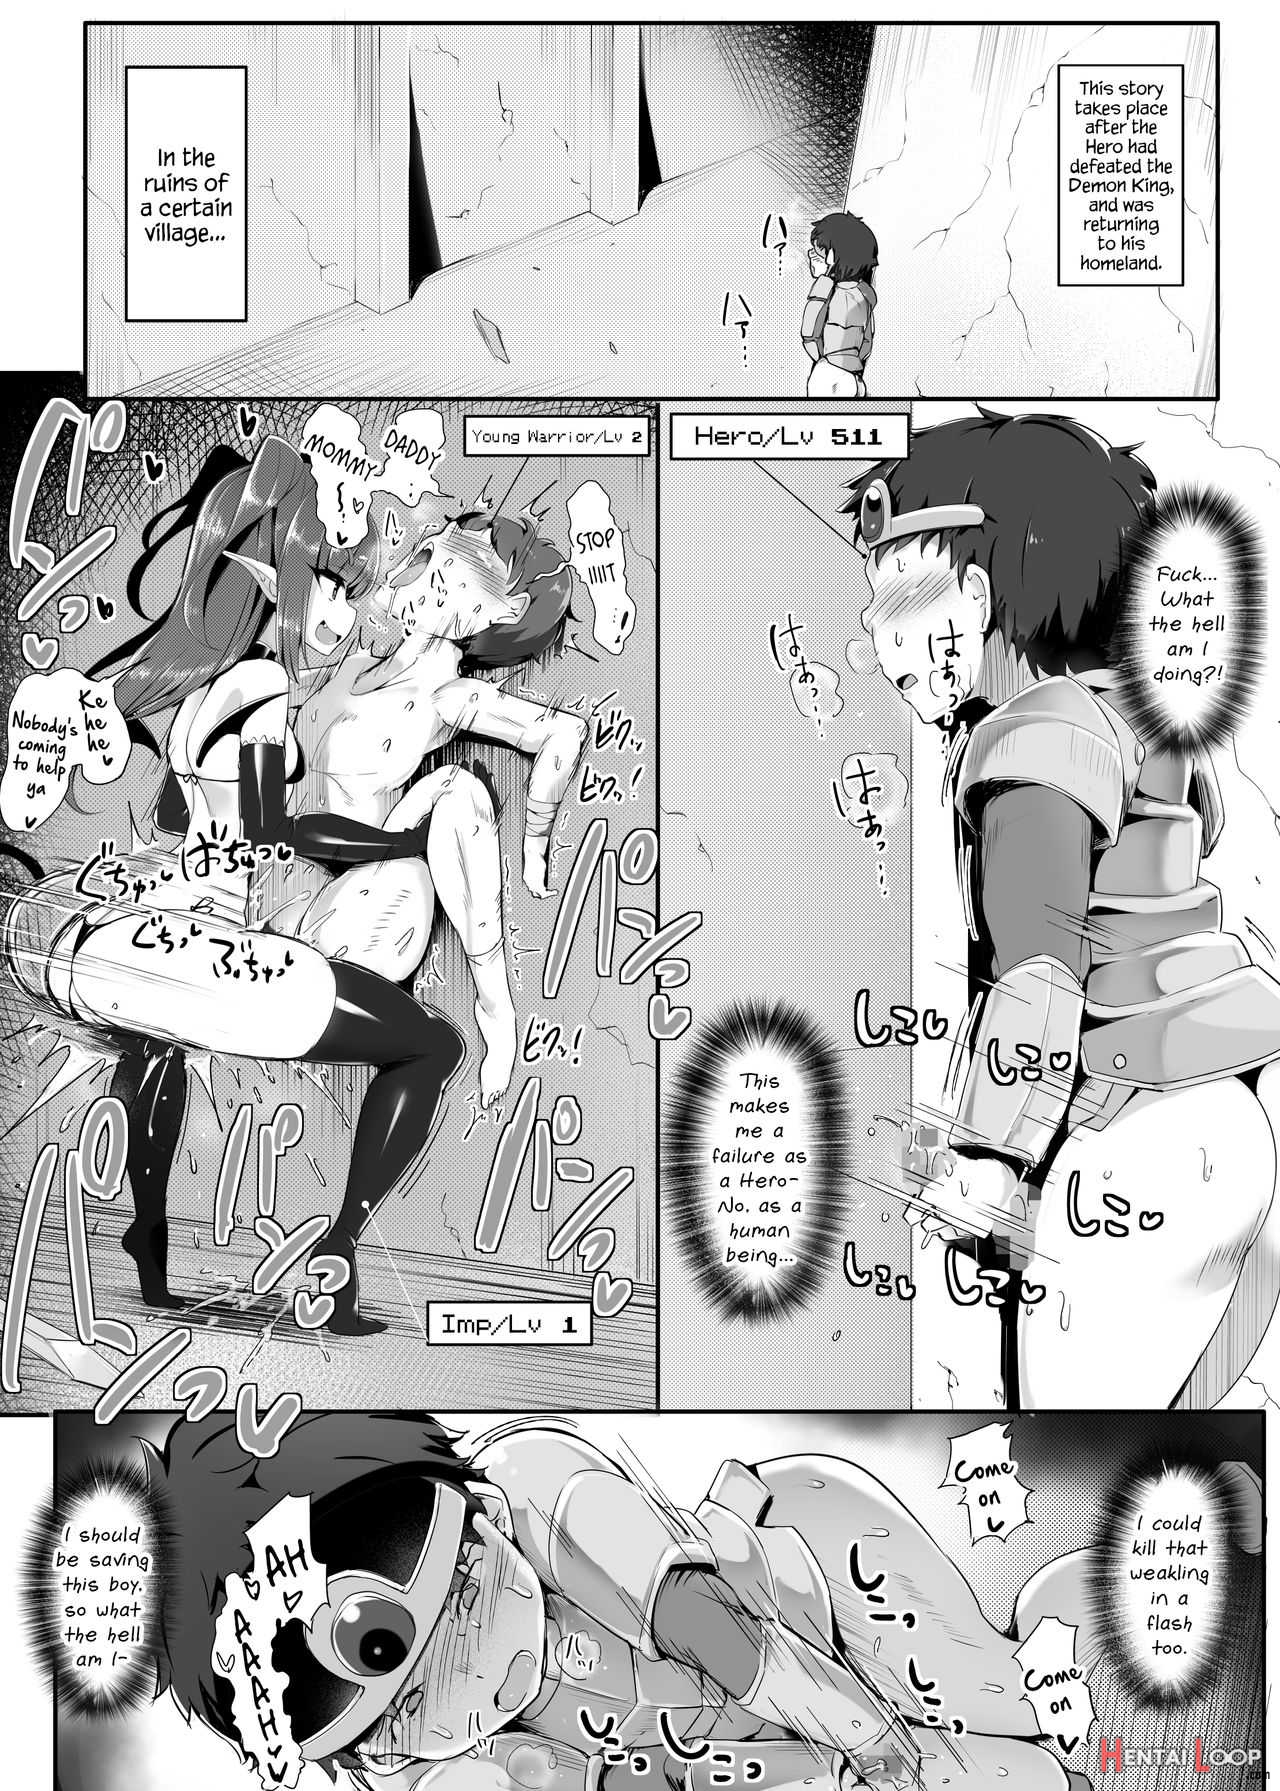 Page 4 of The Humping Hero (by doskoinpo) - Hentai doujinshi for free at  HentaiLoop